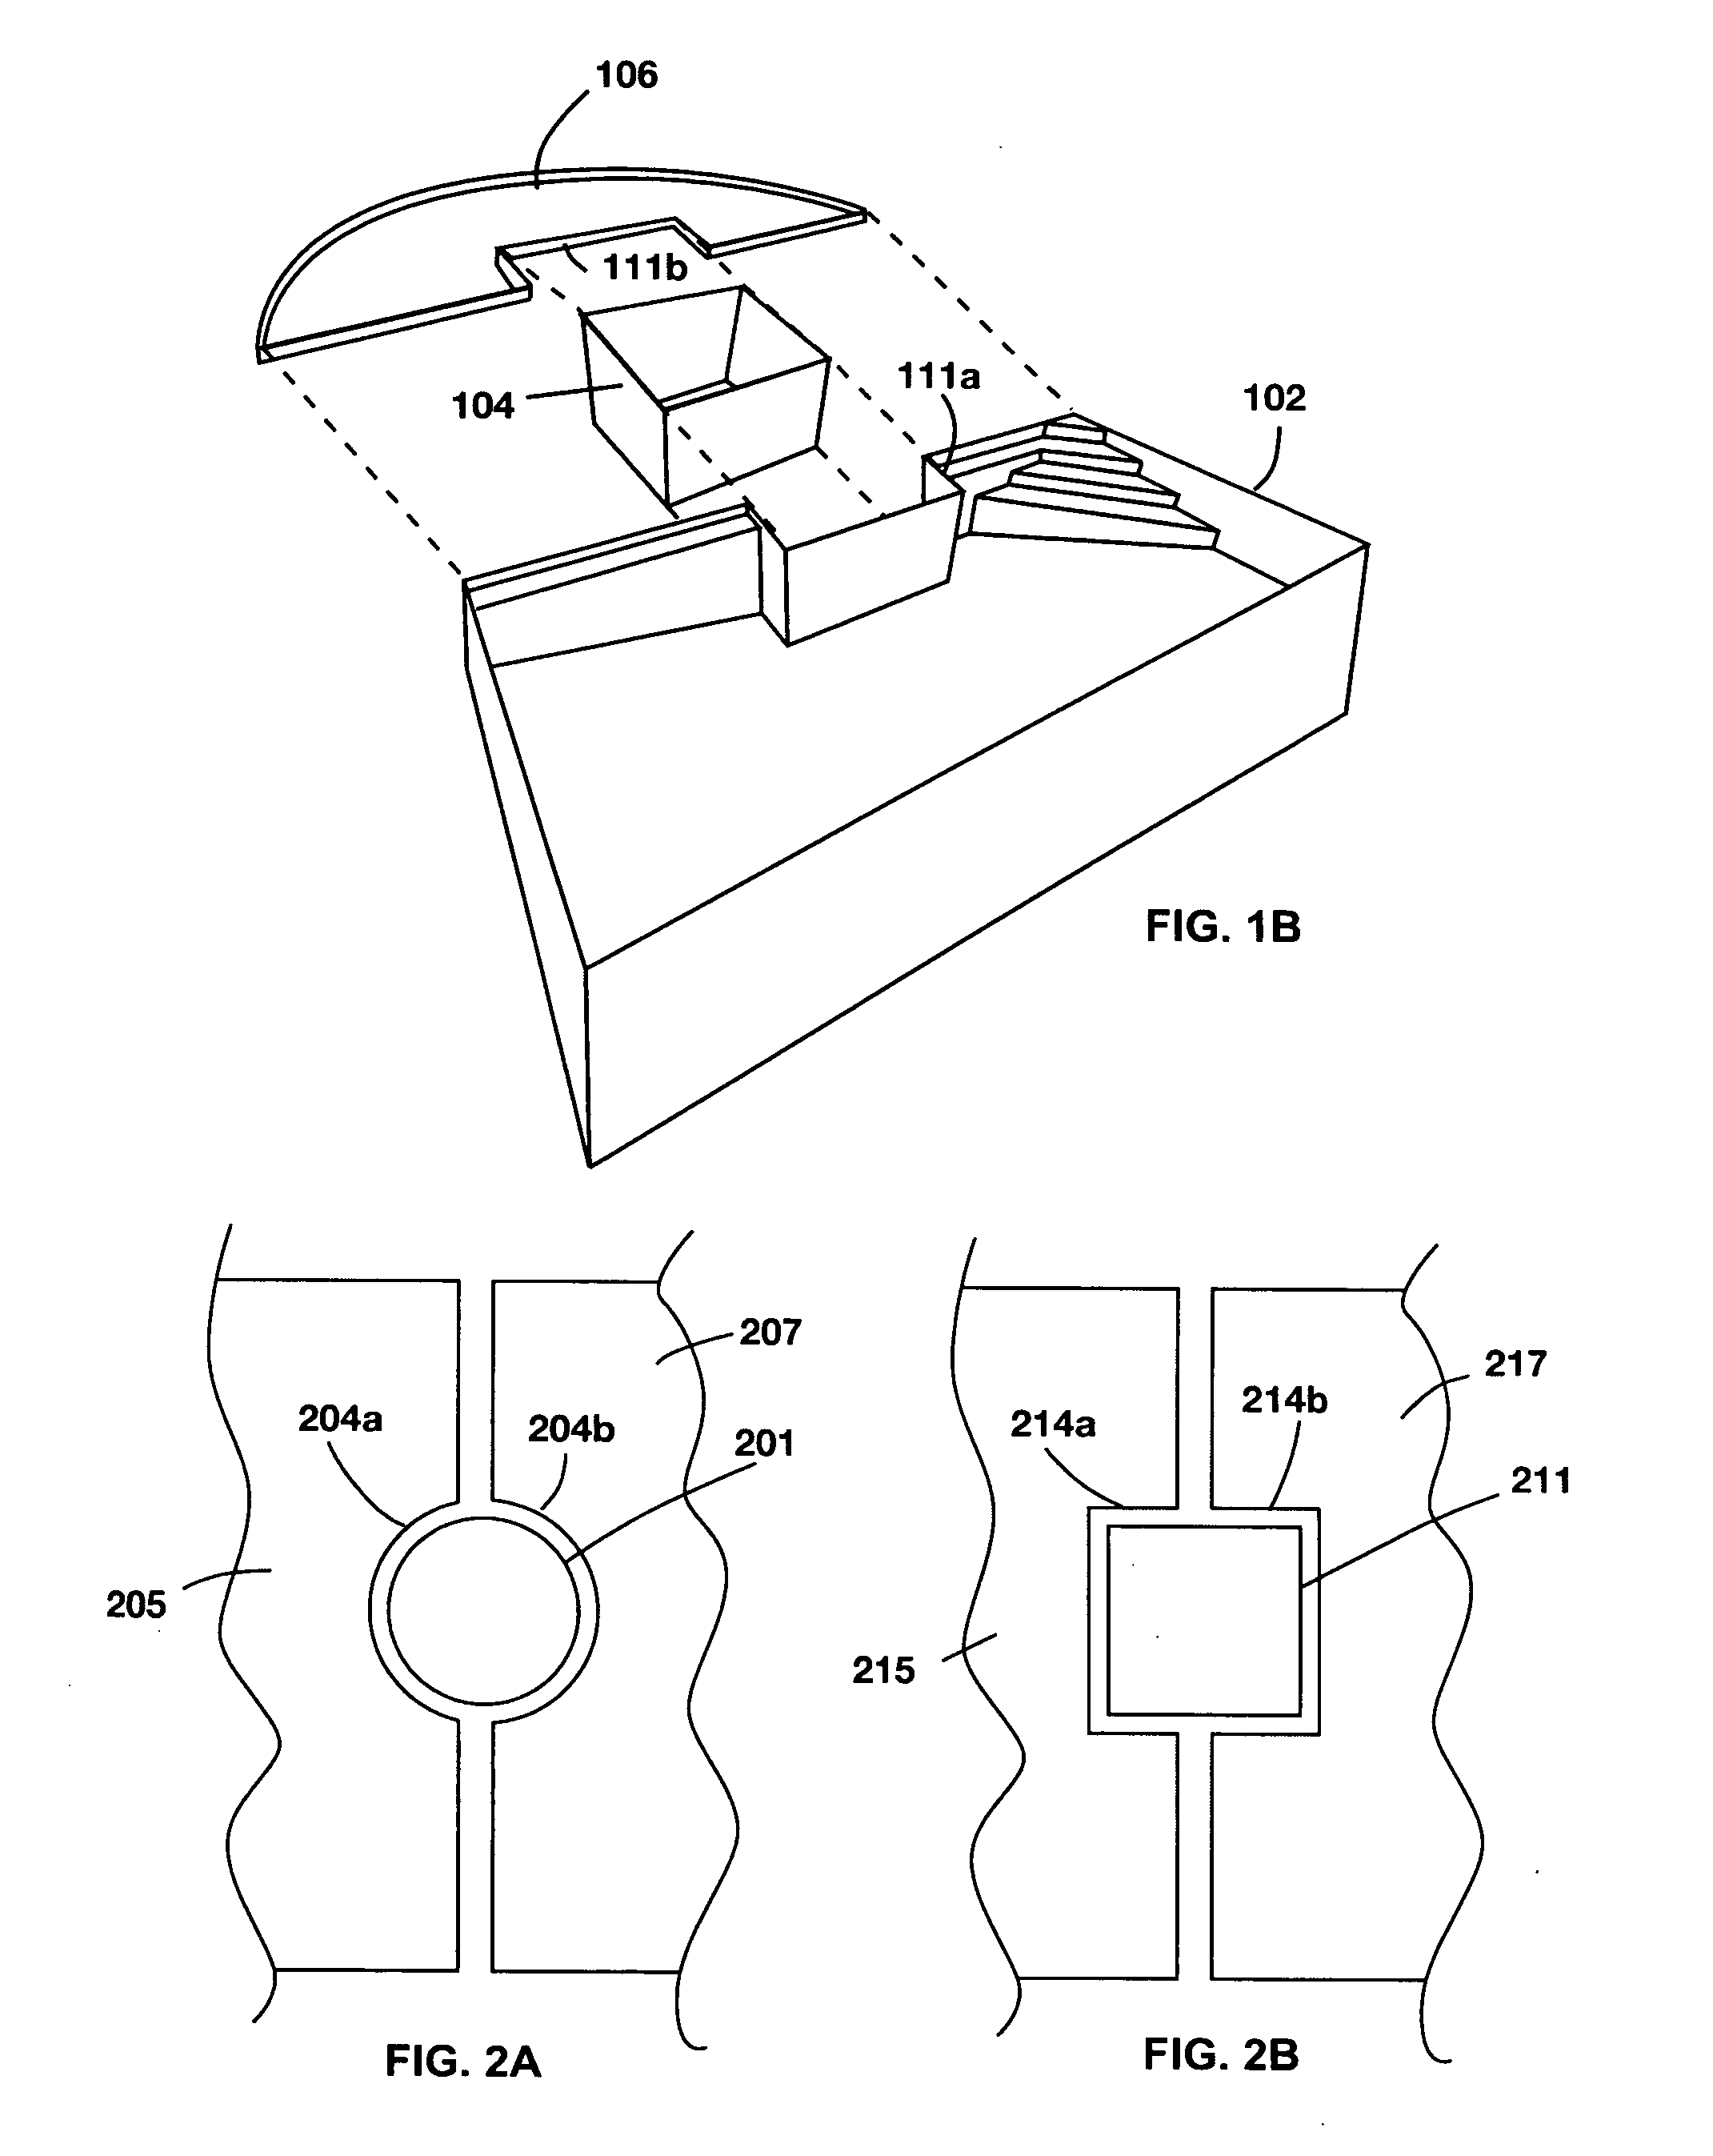 Integrated poolscape comprised of pre-fabricated elements and related methods